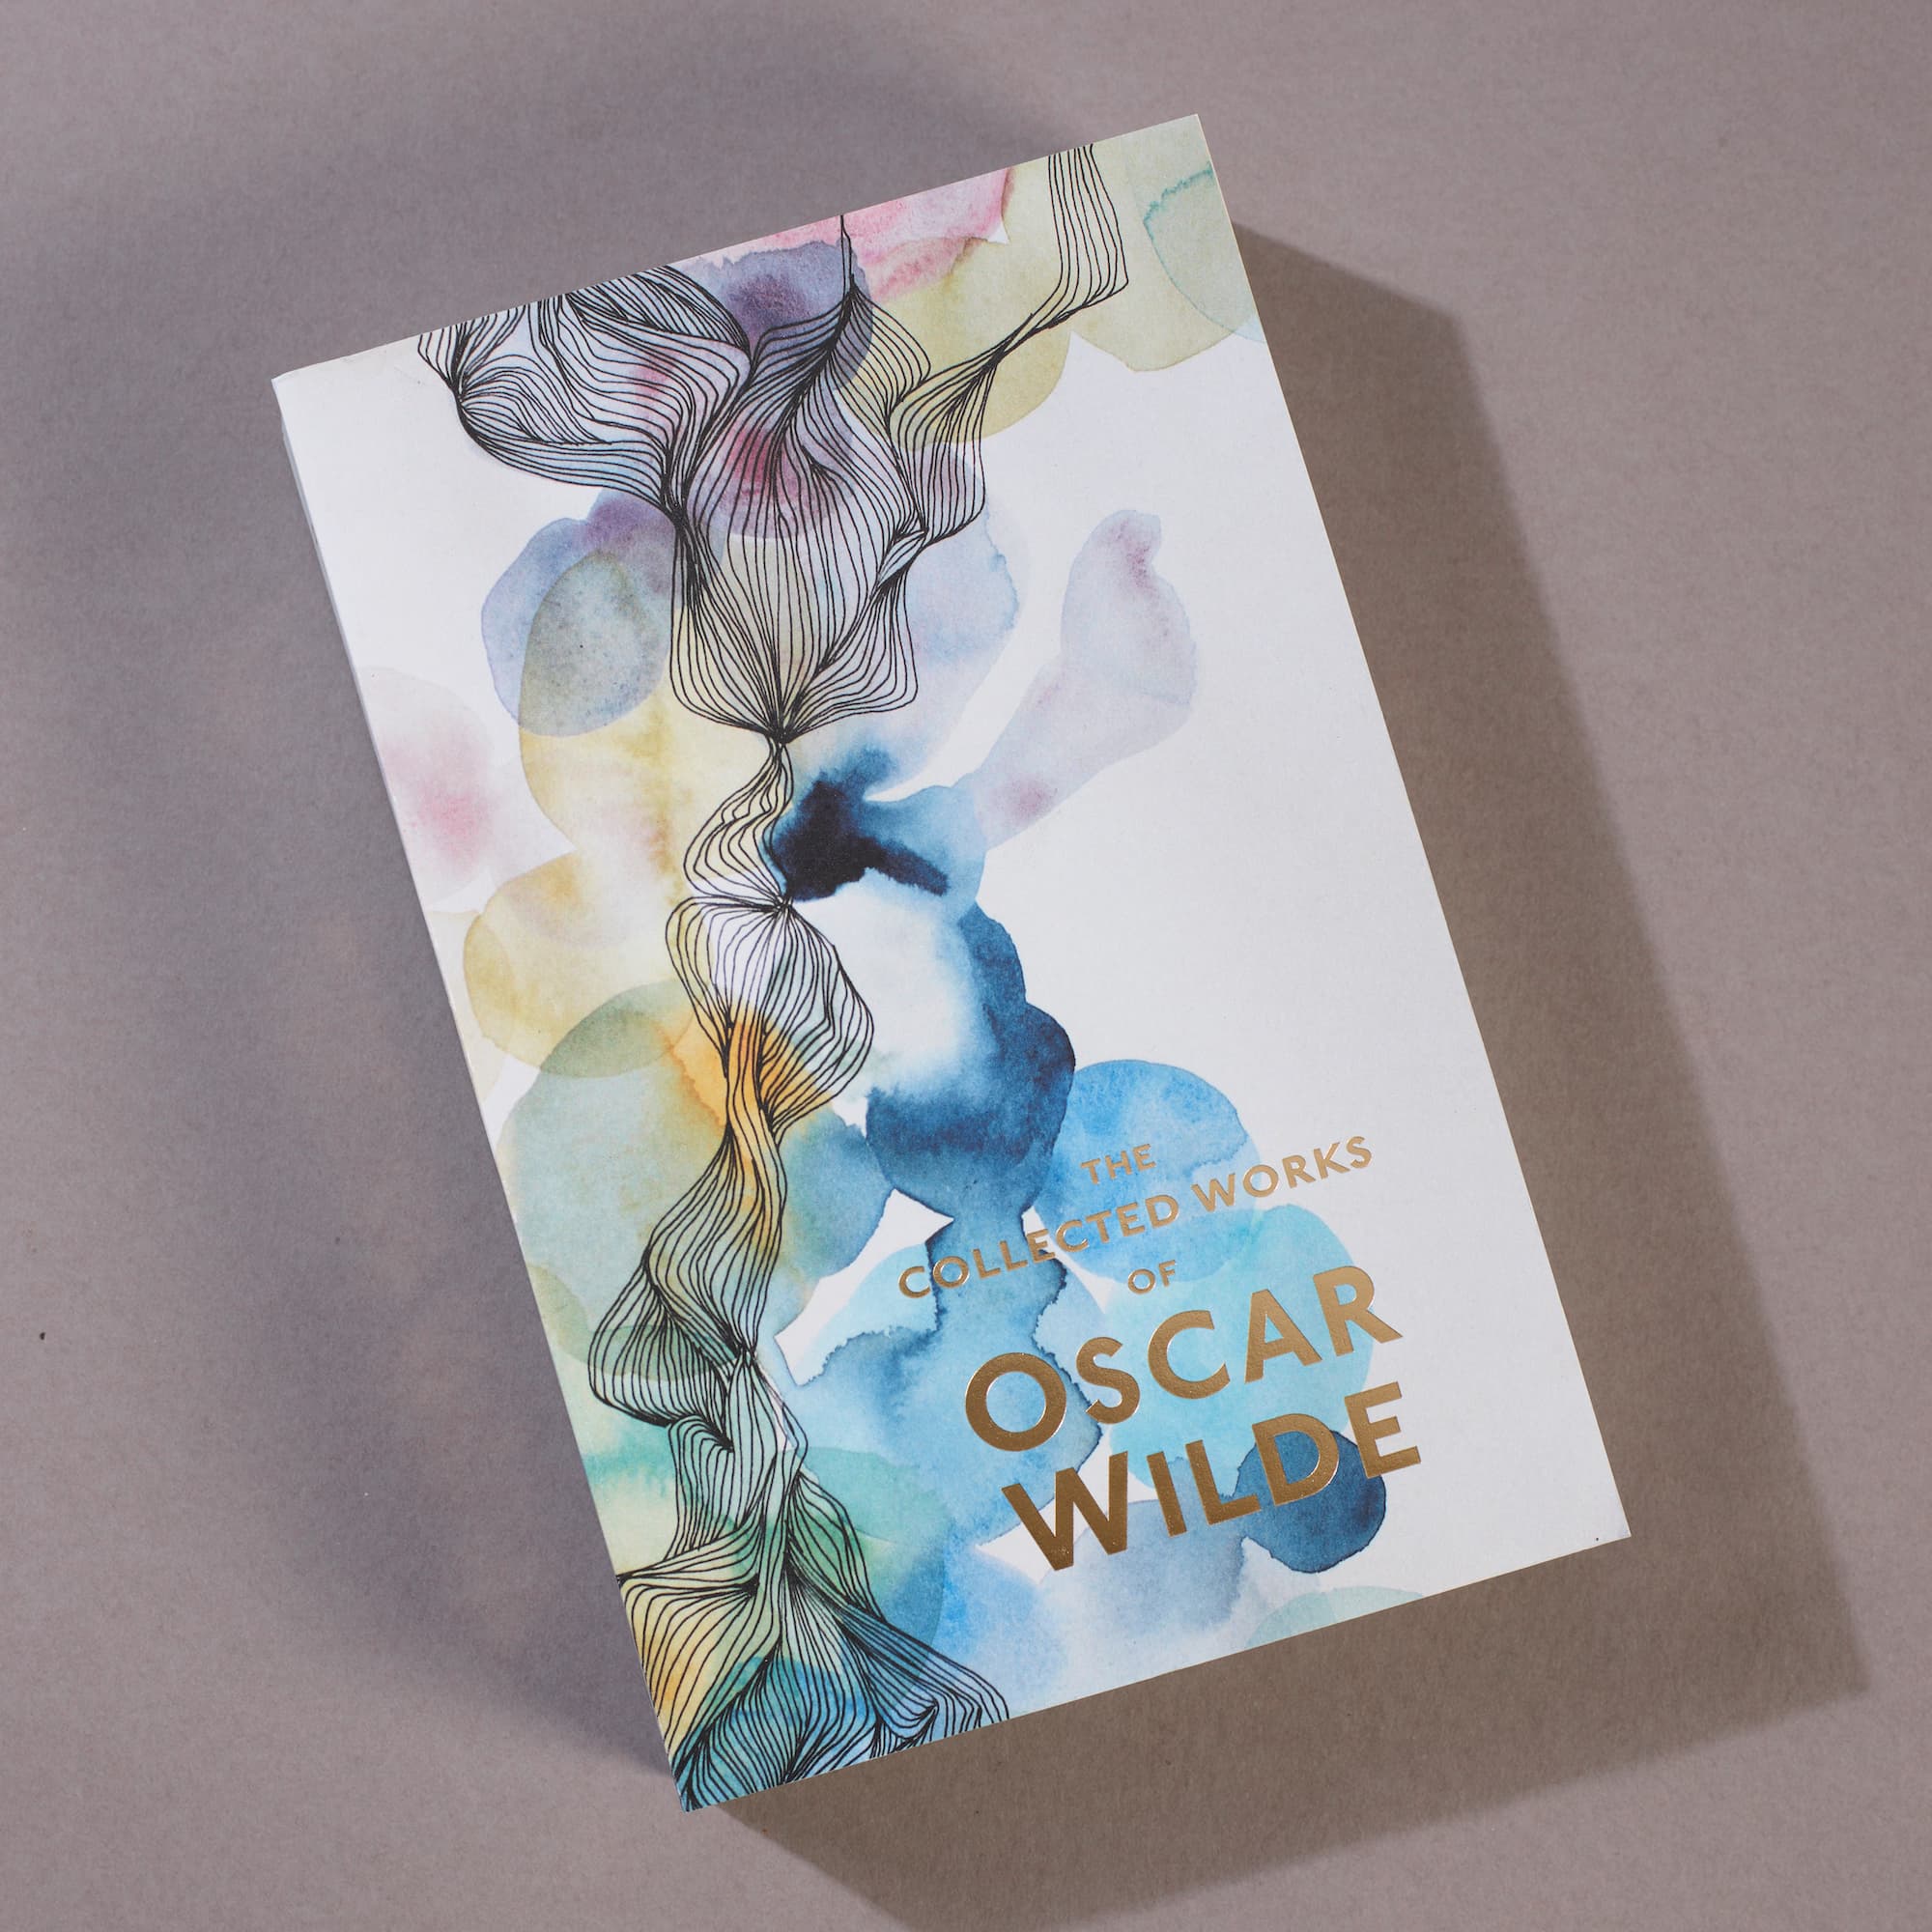 Collected Works of Oscar Wilde PB